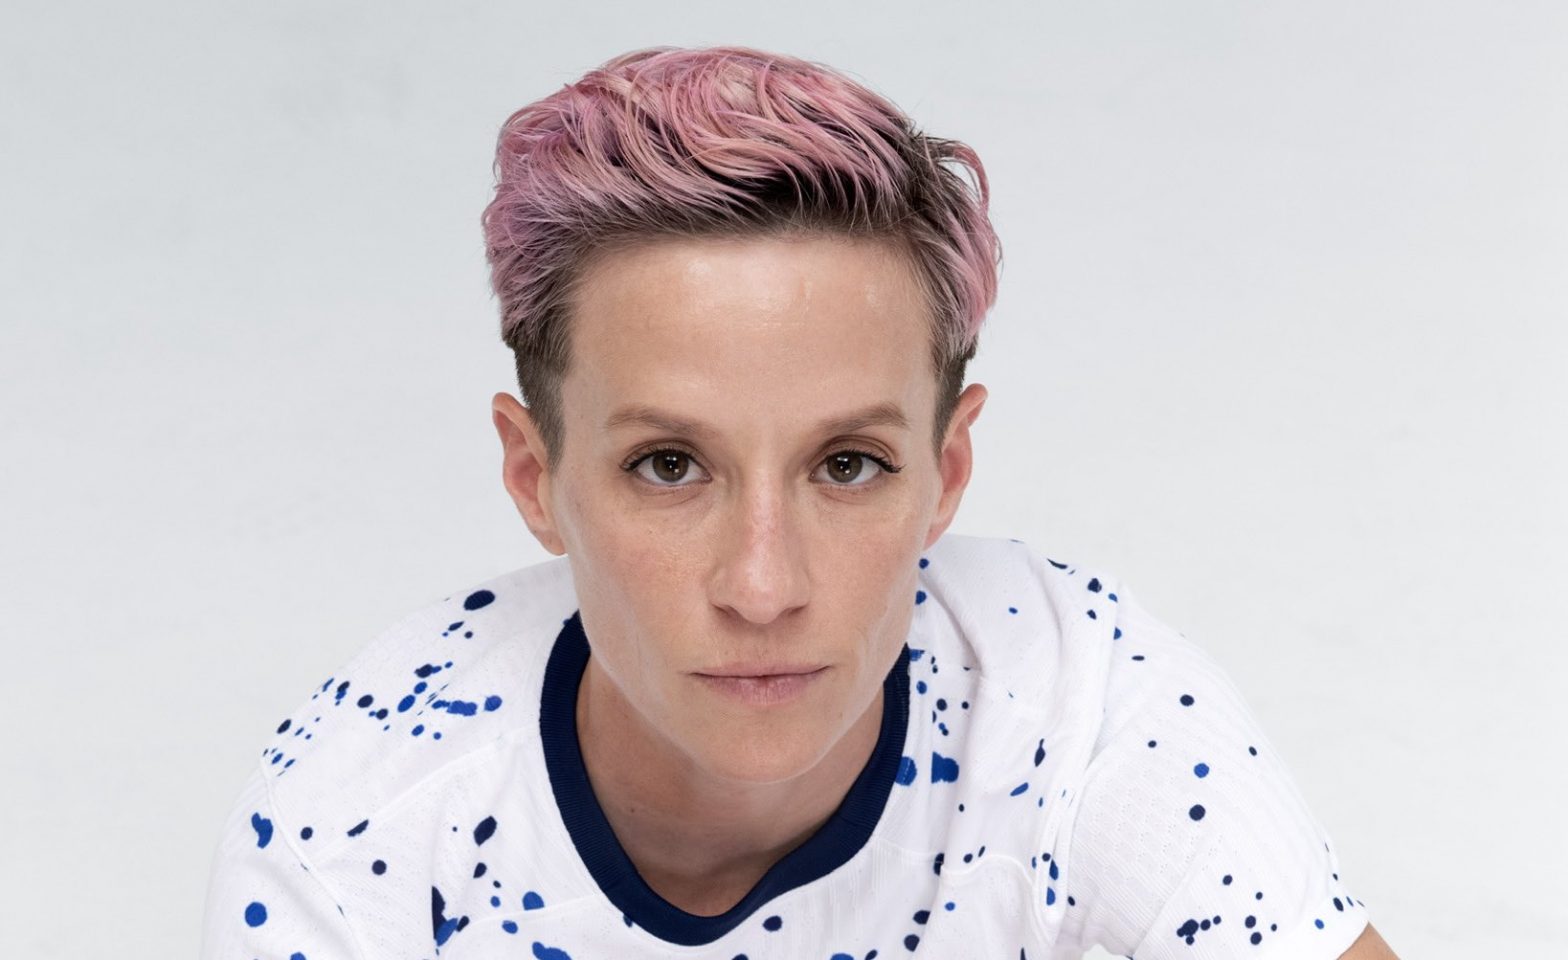 Megan Rapinoe’s controversial activism moments: From supporting Black Lives Matter to demanding equal pay